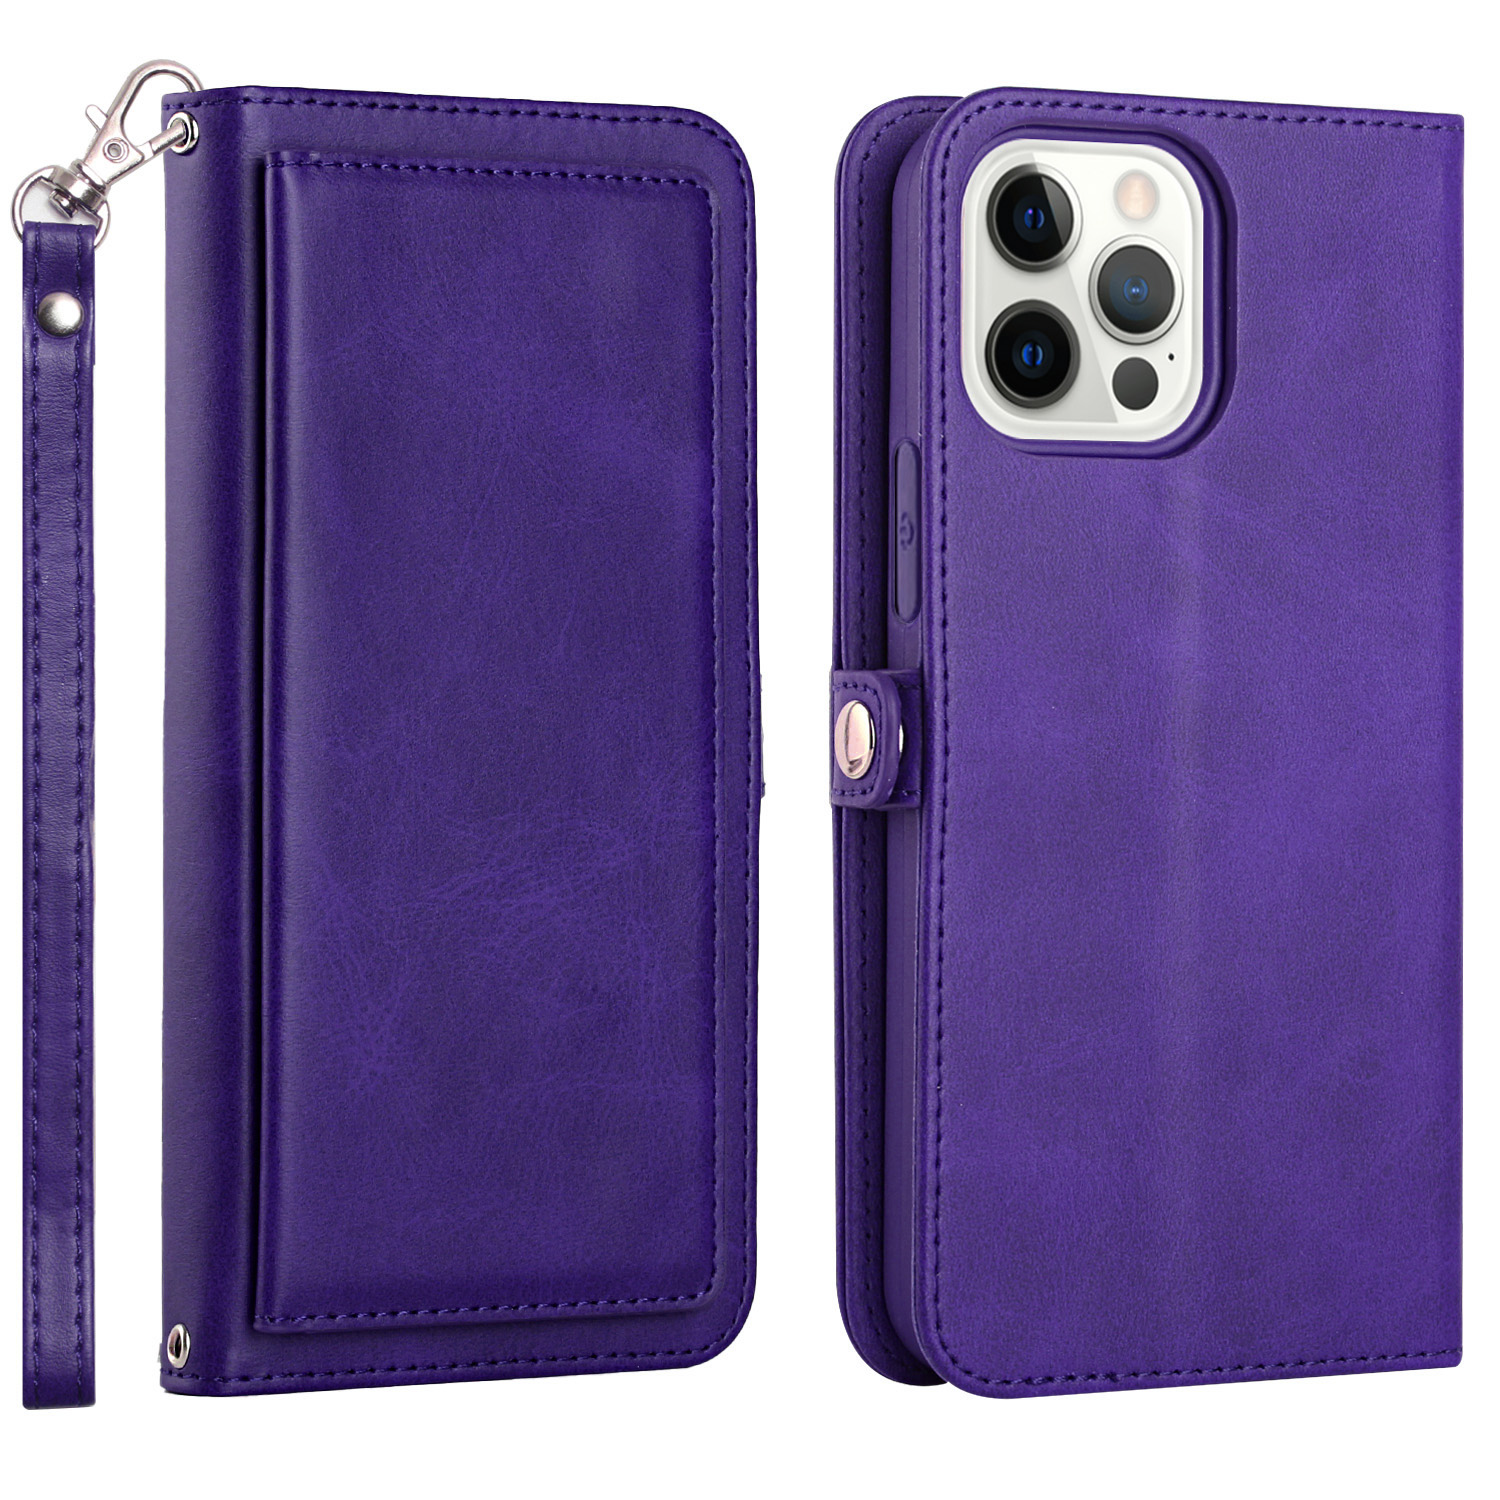 Premium Leather WALLET Cover Case with Card Slot for iPhone 14 Pro Max (Purple)